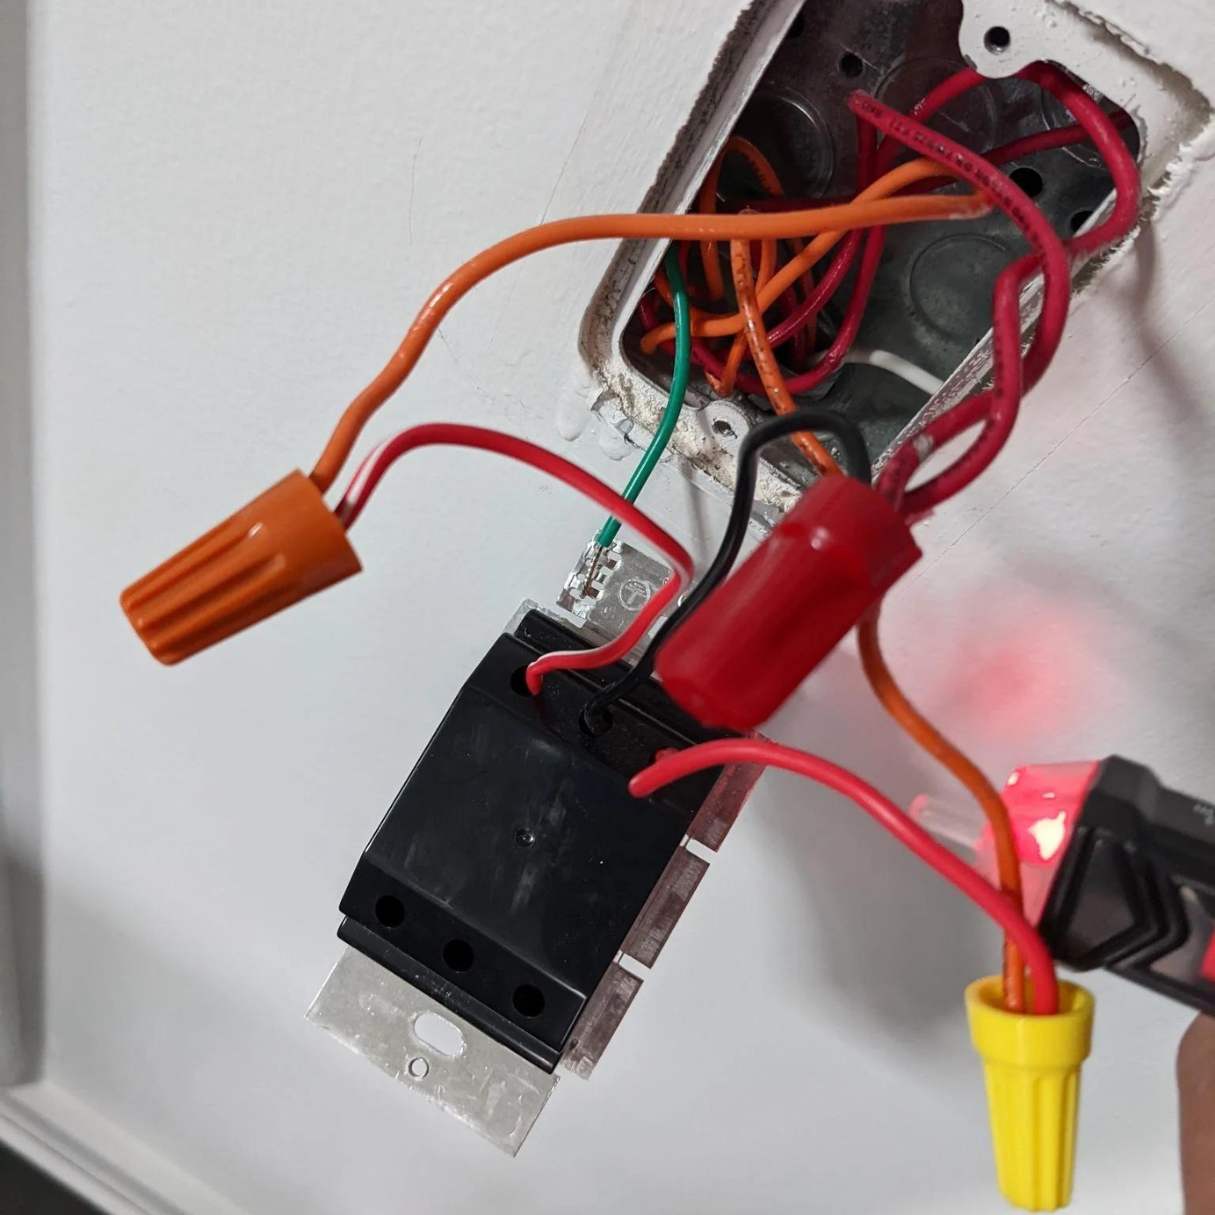 How To Connect A 3-Way Dimmer Switch